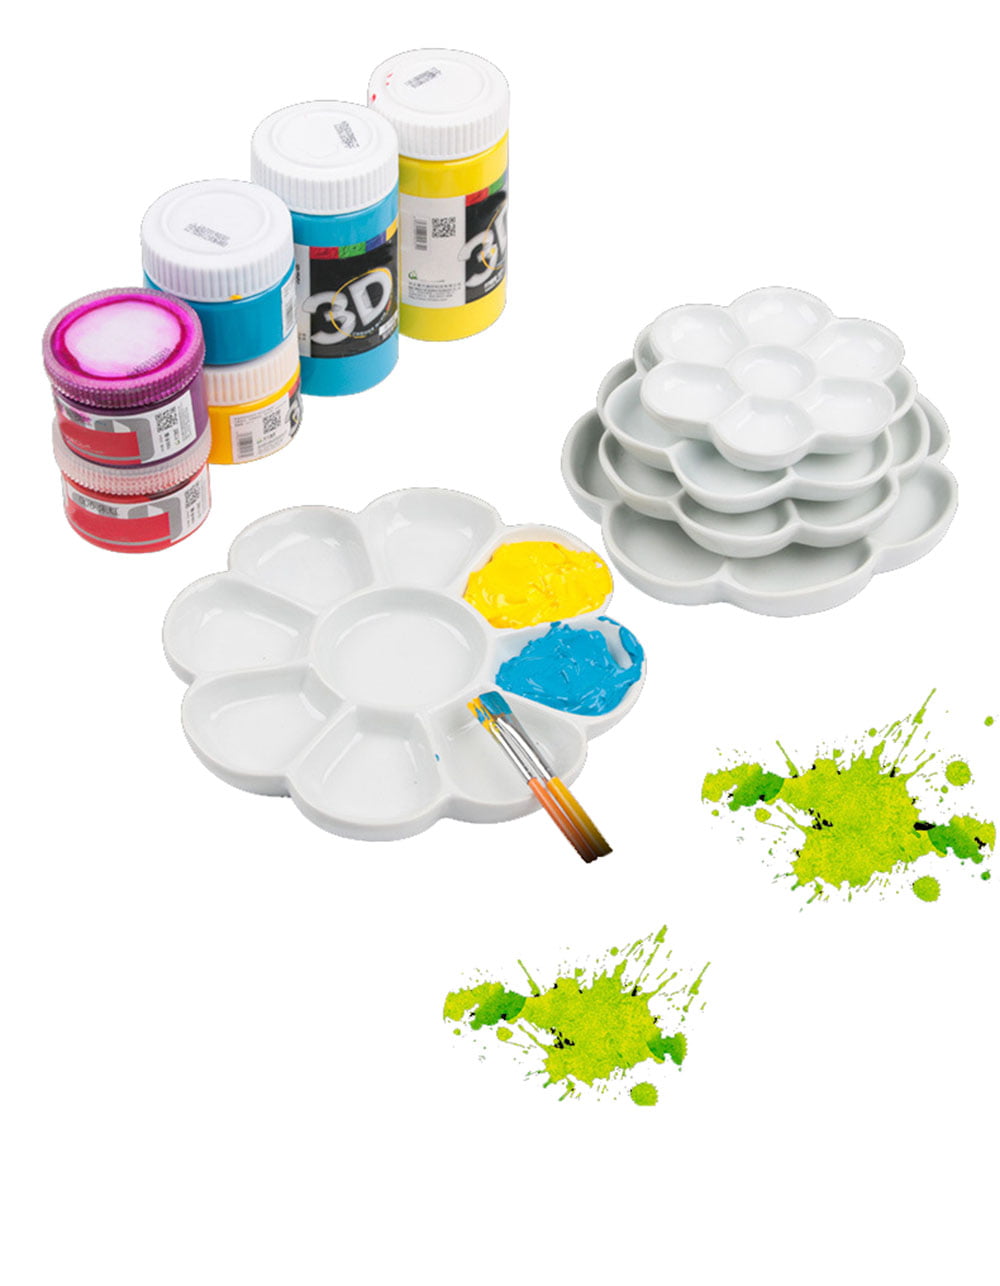  Foraineam 3 Pieces Ceramic Paint Palette Artist 9 Well  Porcelain Flower Shape Painting Oil Watercolor Mixing Trays